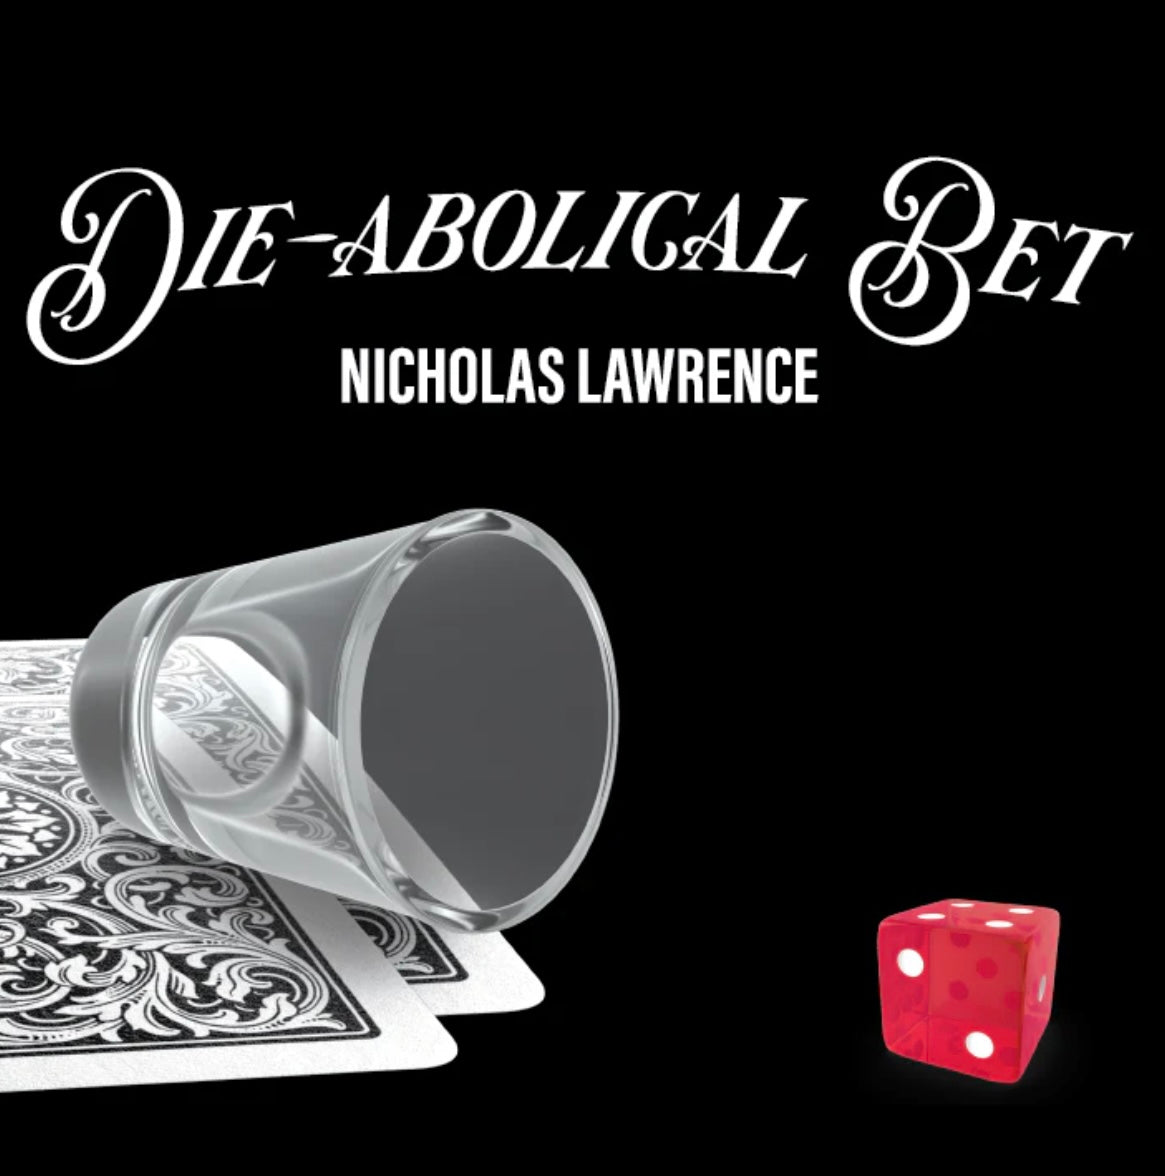 Die-abolical Bet Magic Trick by Nicholas Lawrence